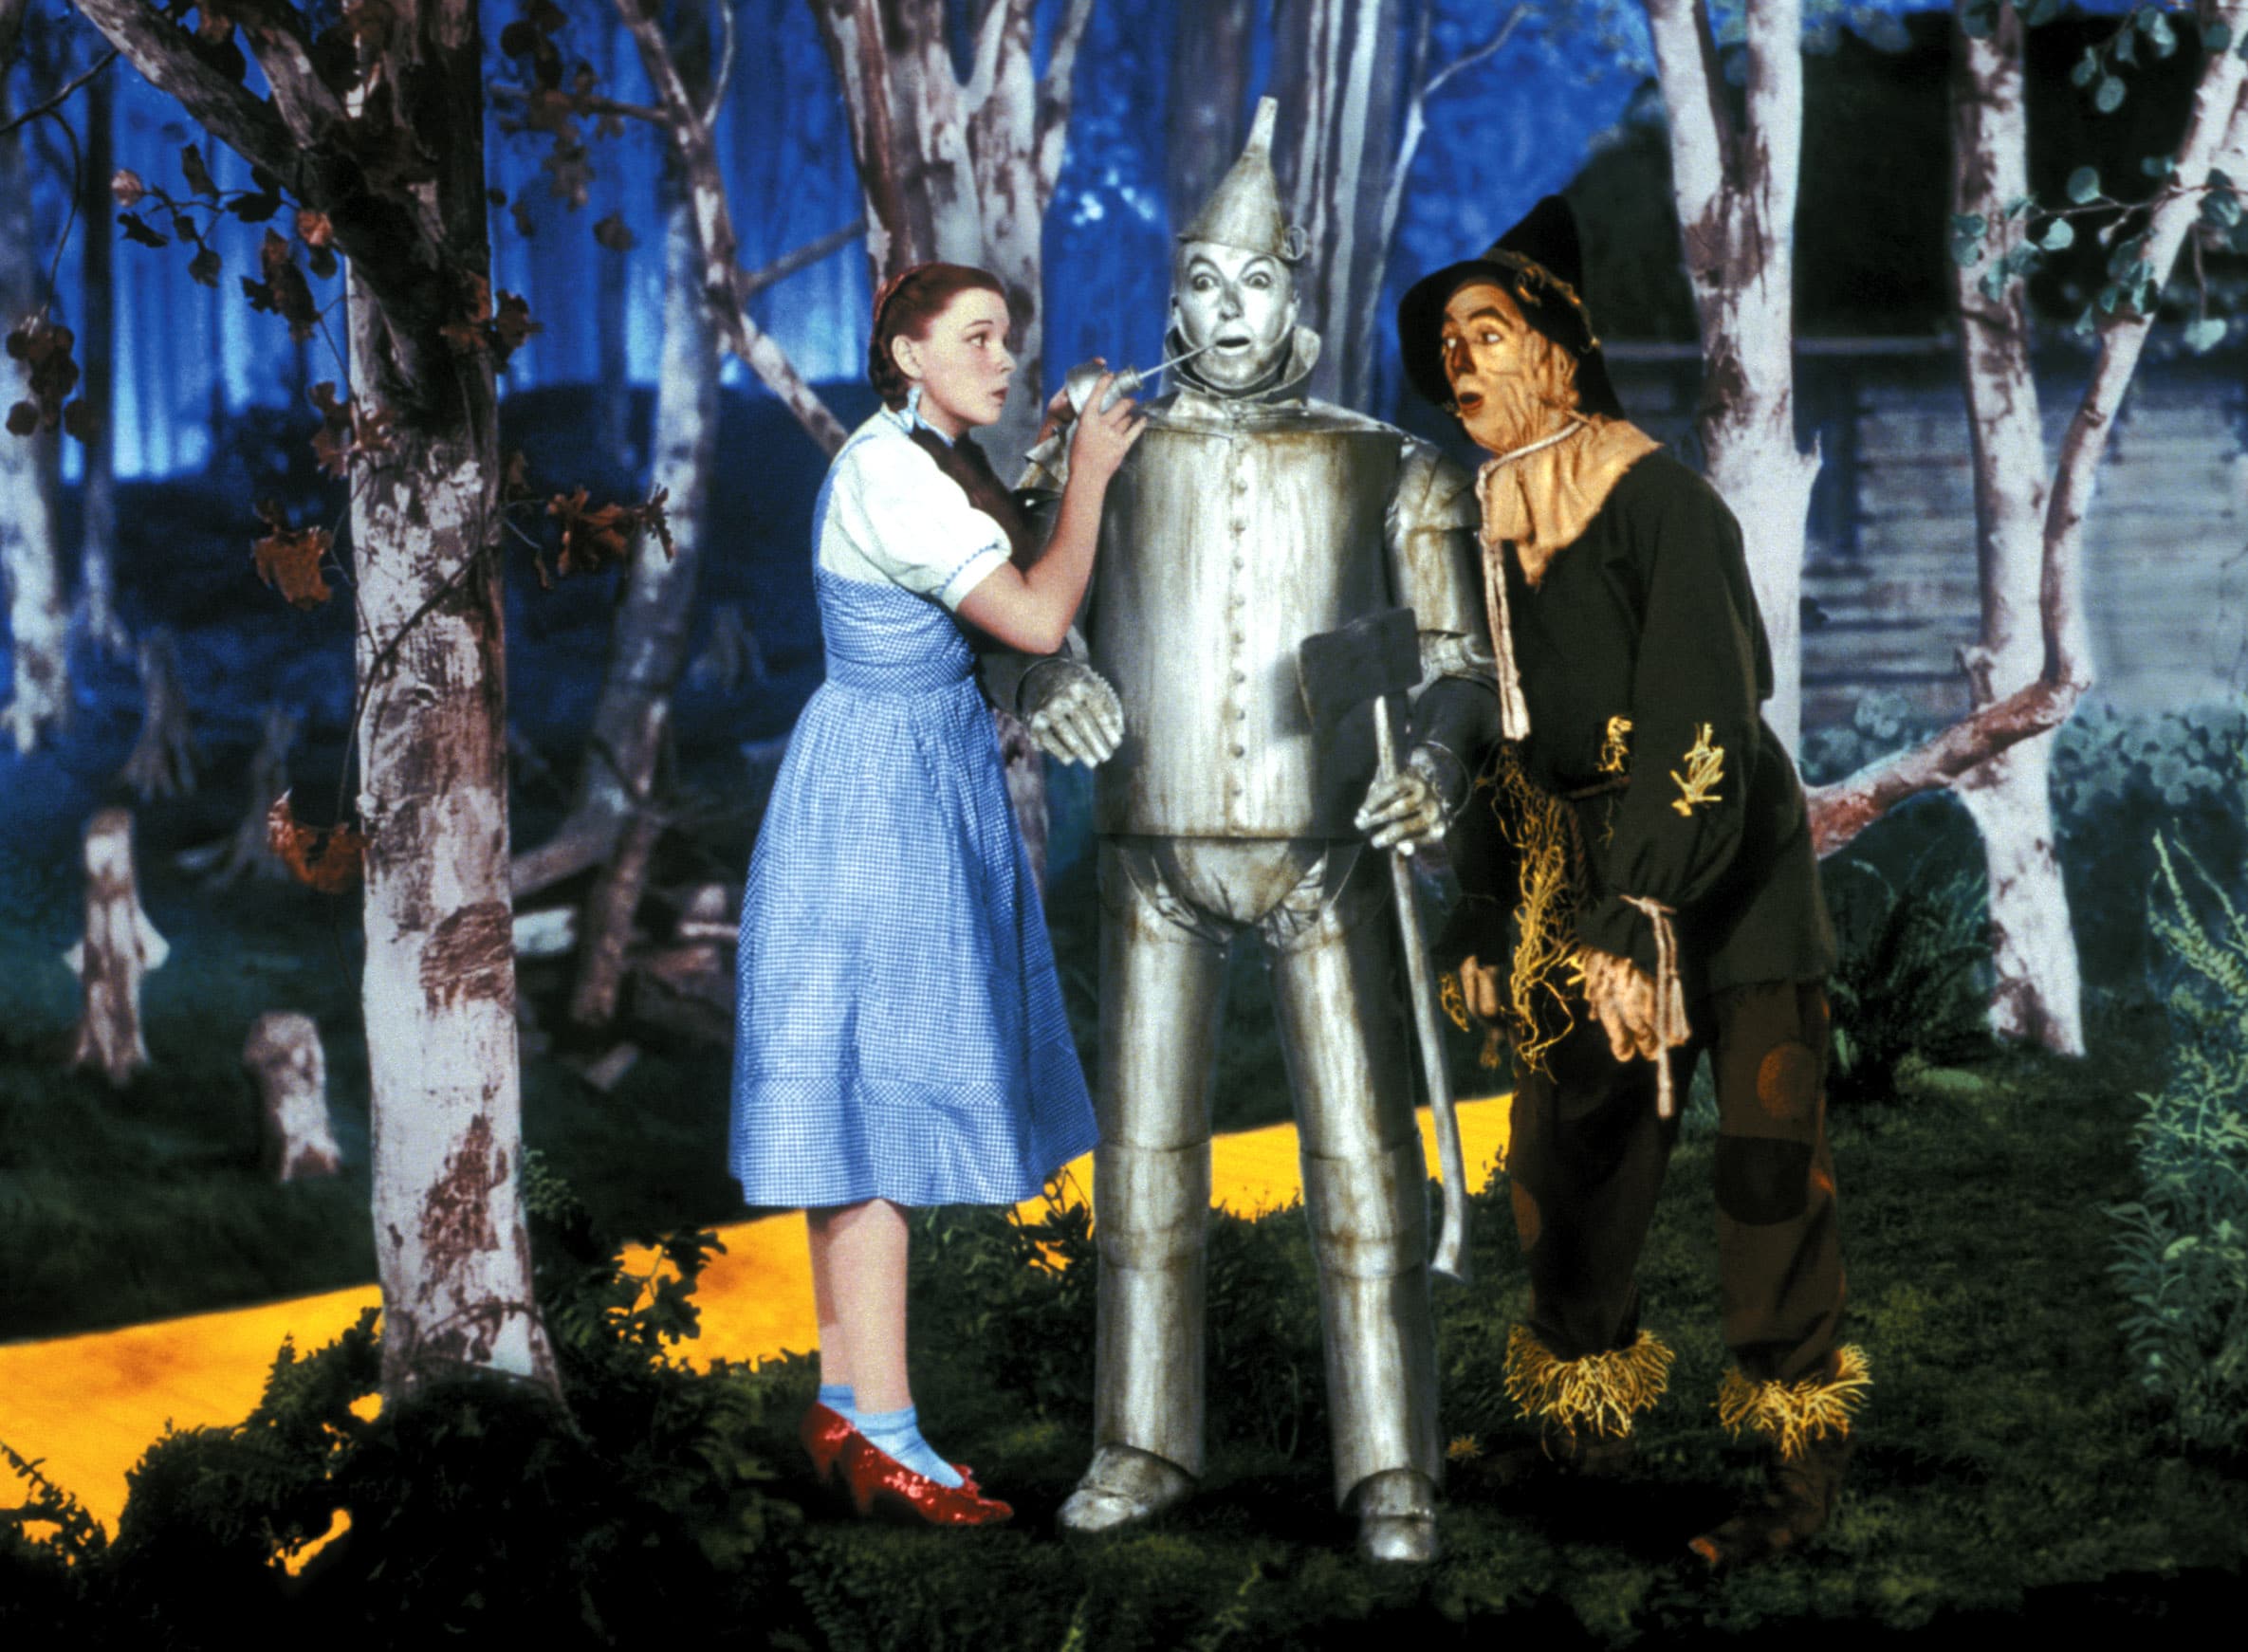 THE WIZARD OF OZ, Judy Garland, Jack Haley, Ray Bolger, 1939